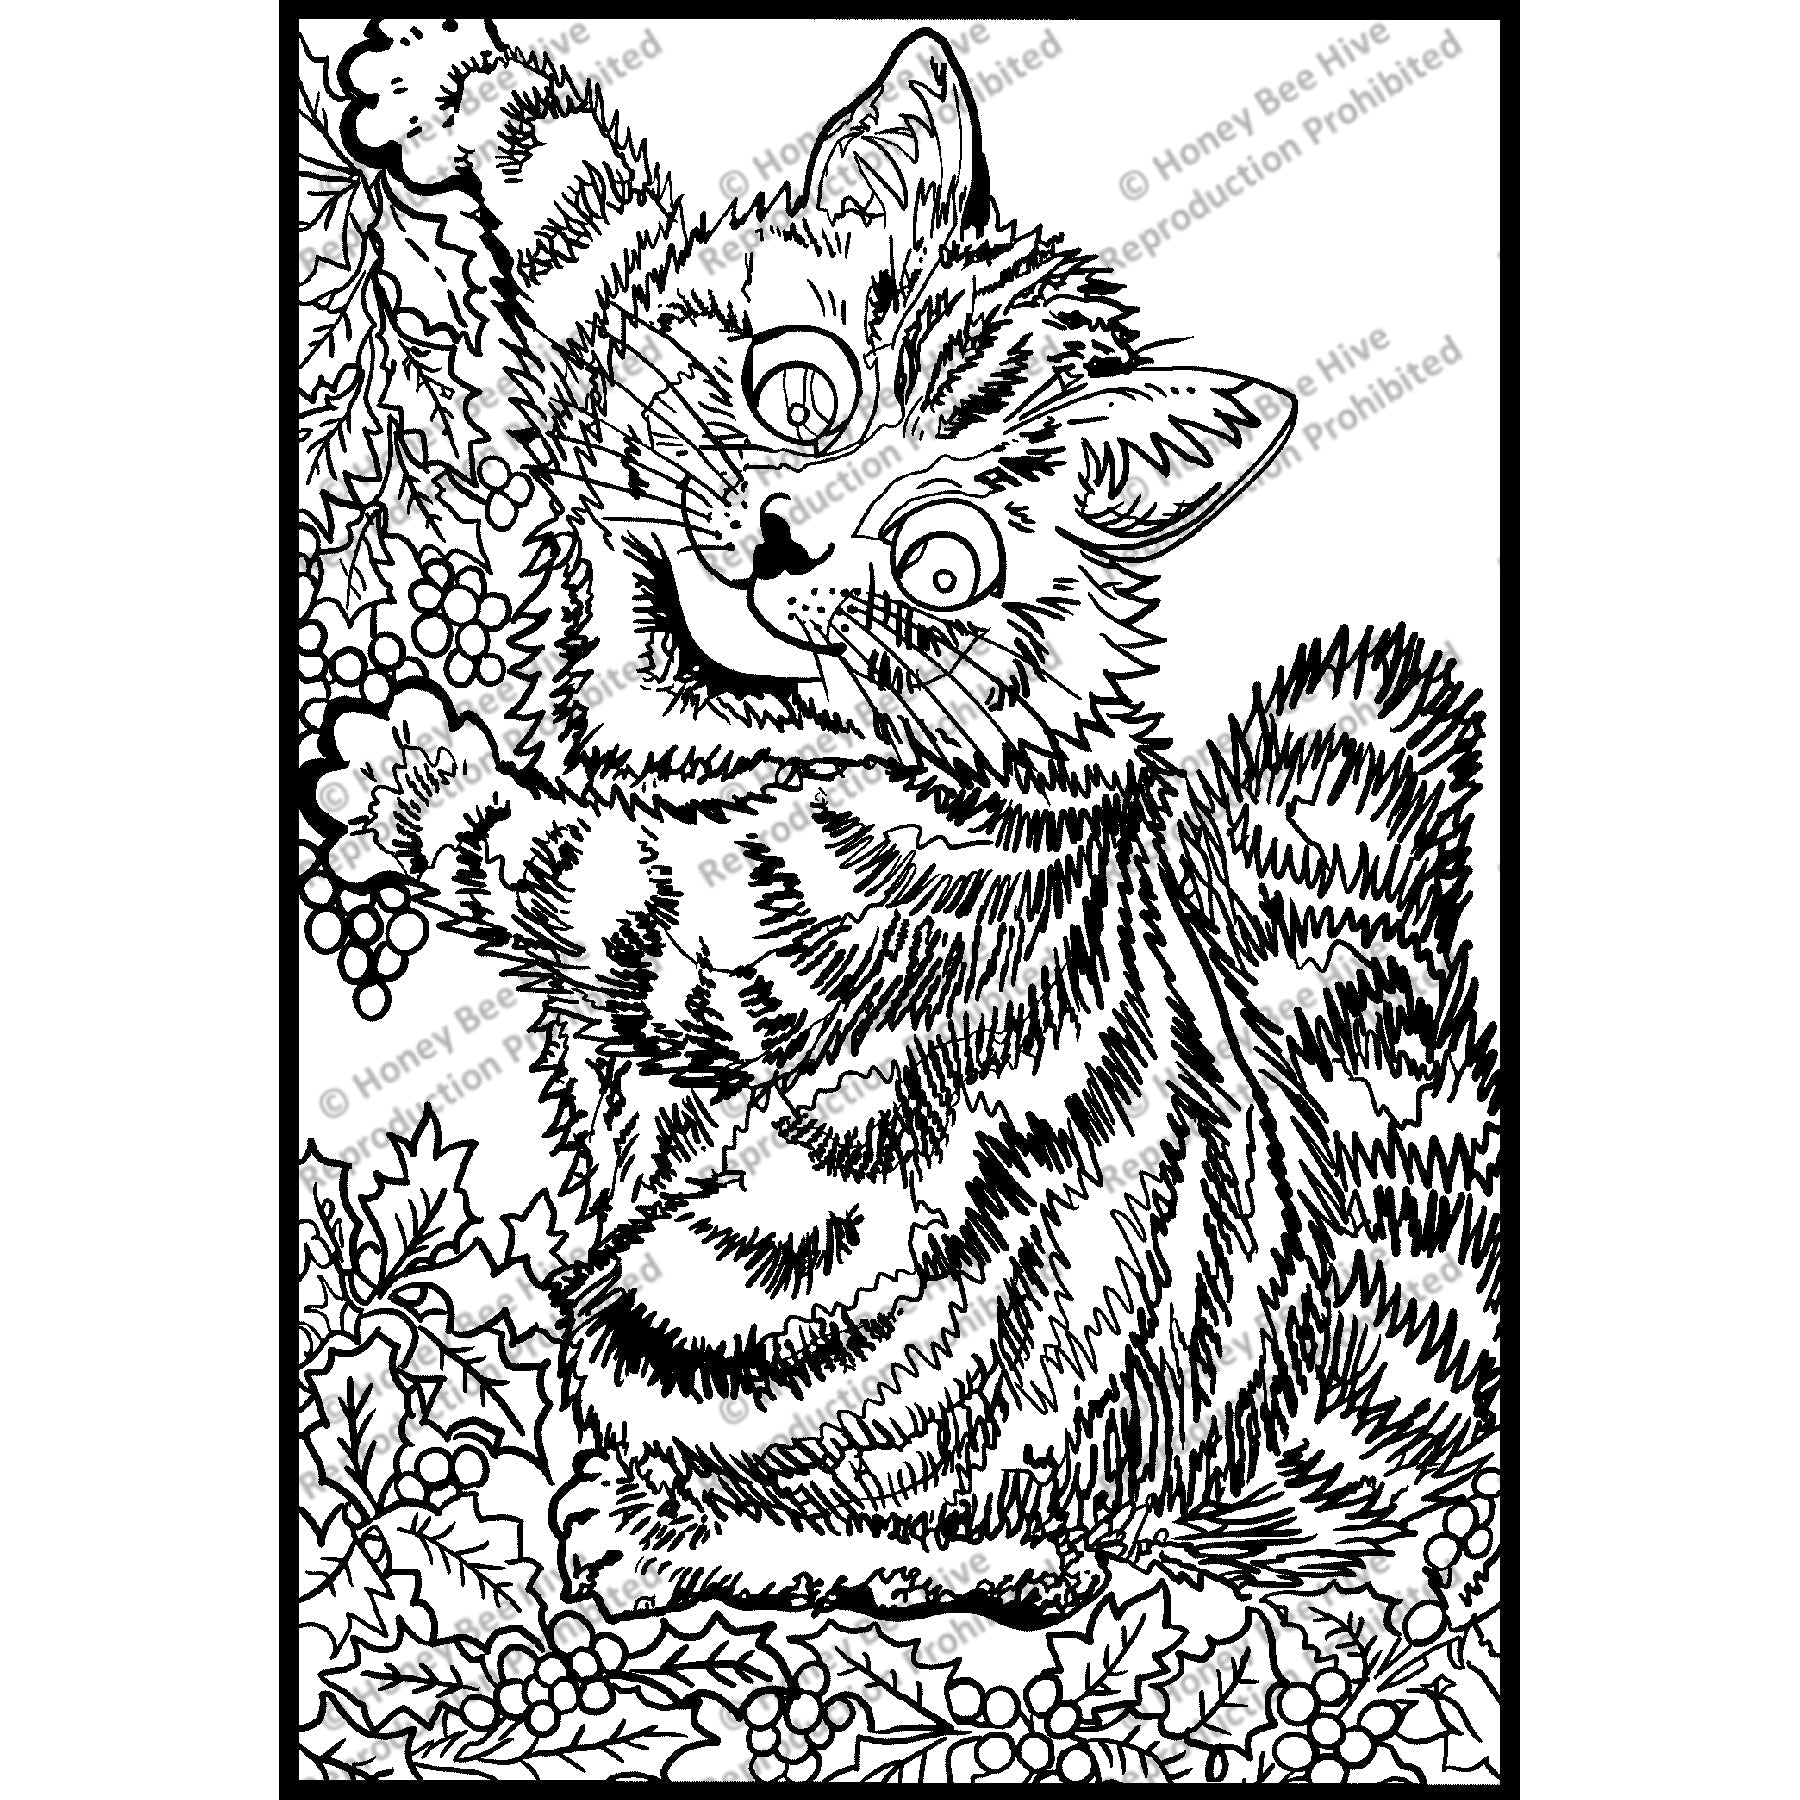 Holly Cat Decorating by Louis Wain, 1905, rug hooking pattern